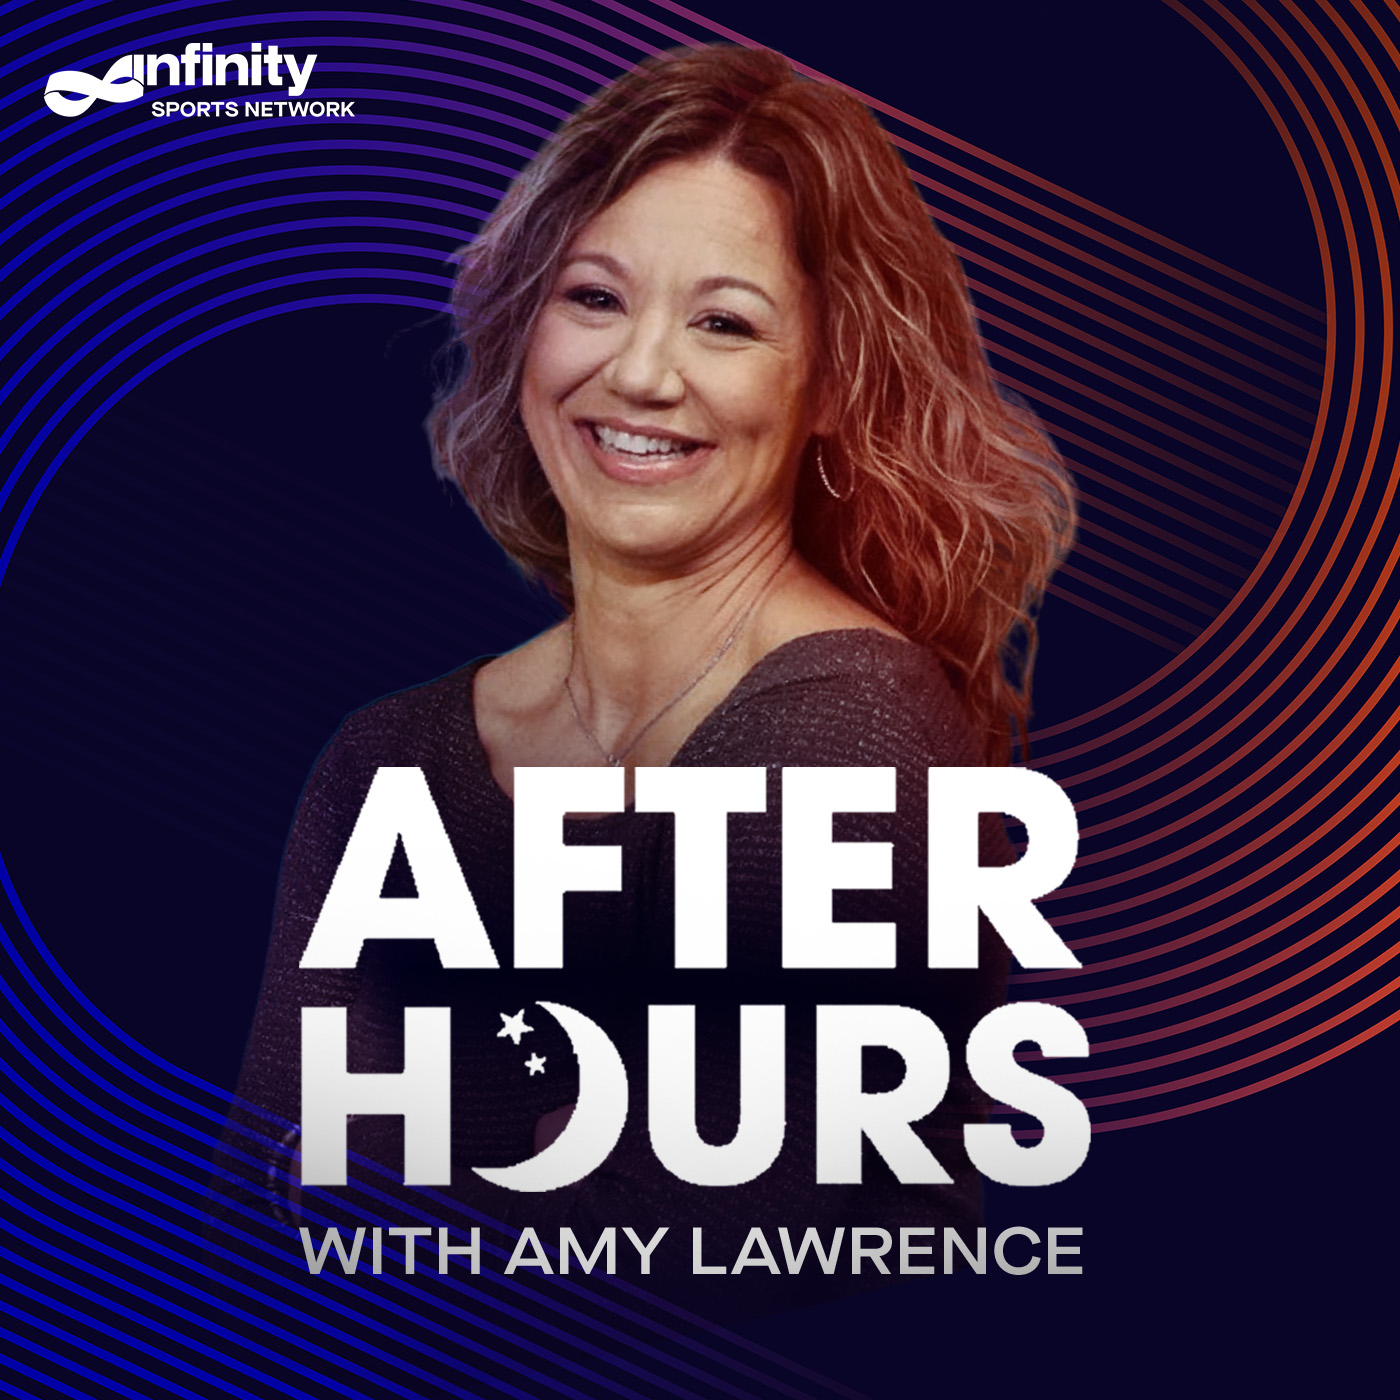 4/19/21 After Hours with Amy Lawrence PODCAST: Hour 3